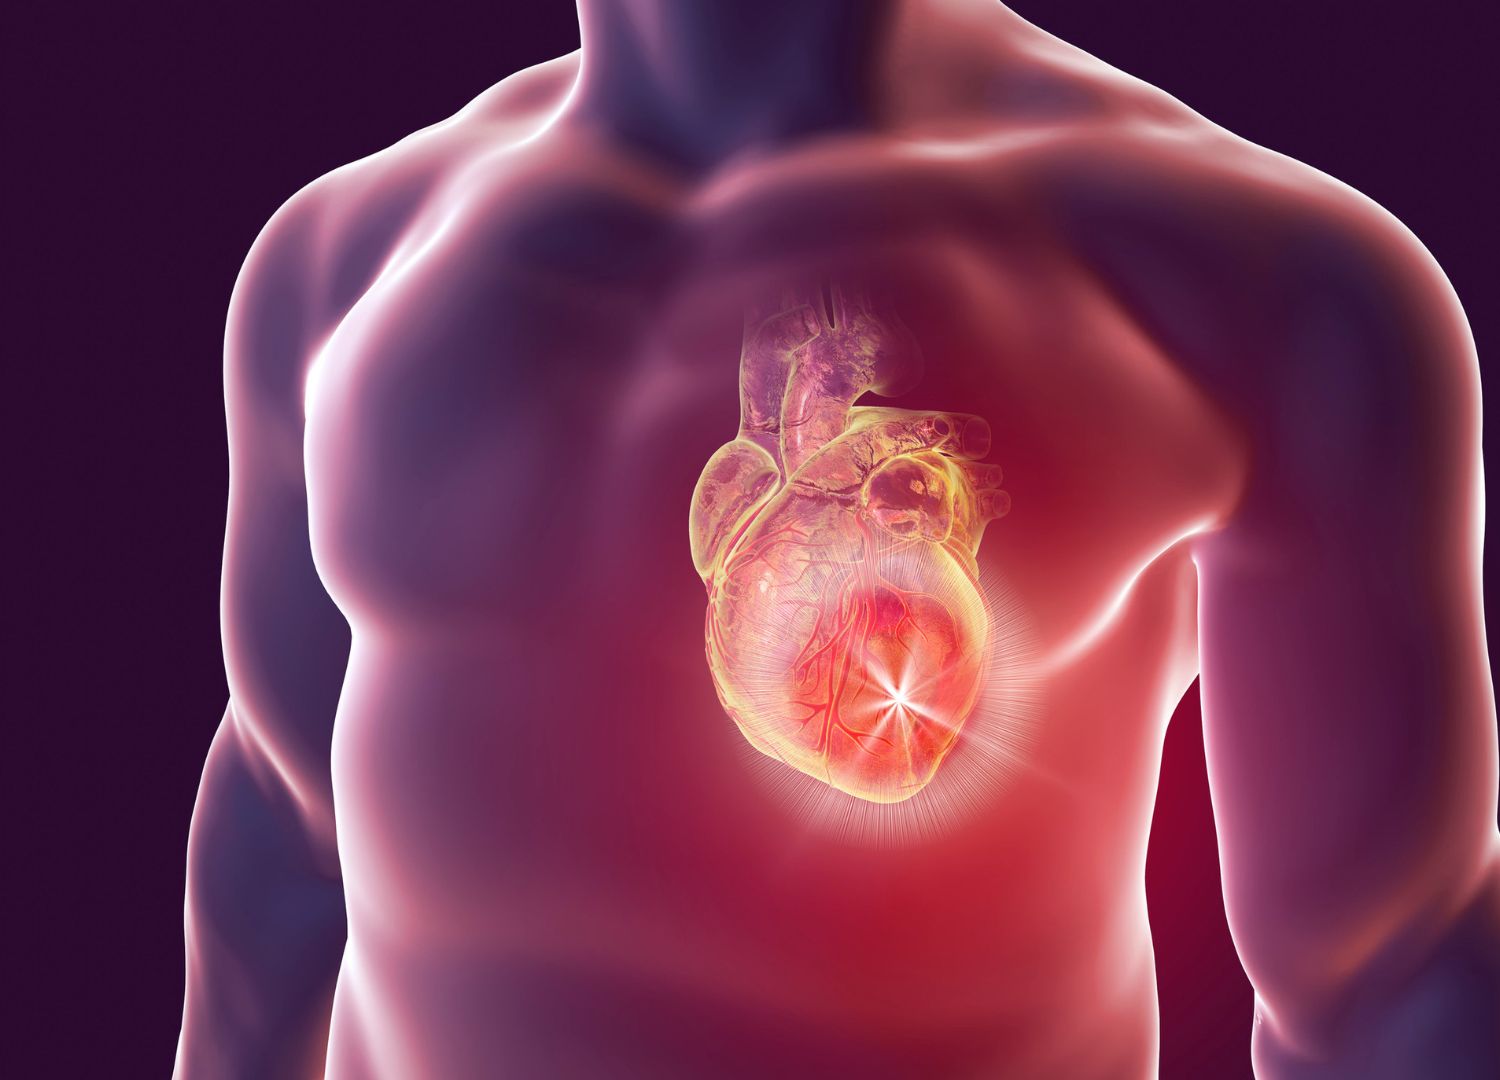 Heart Attack: Causes, Symptoms, and Treatment